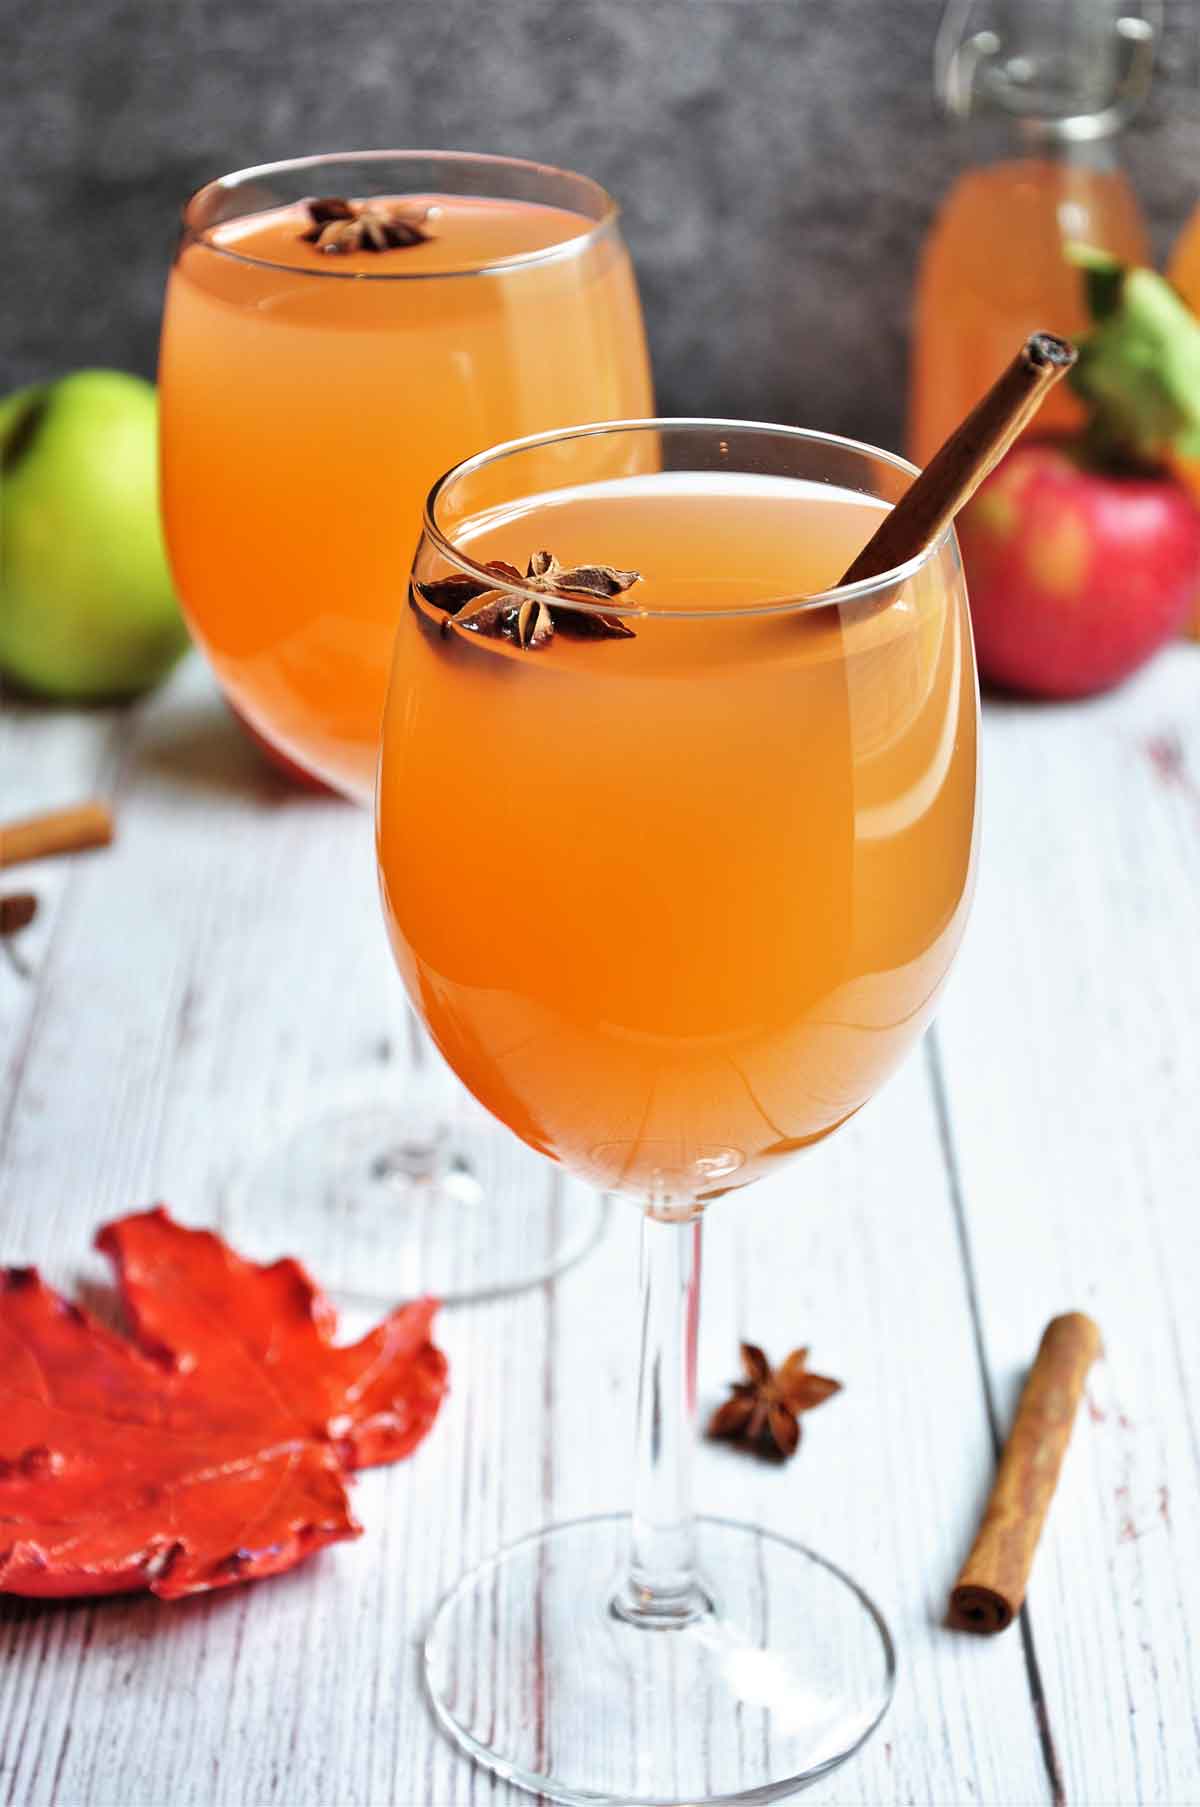 Apple Cider served in a medium size wine glass.